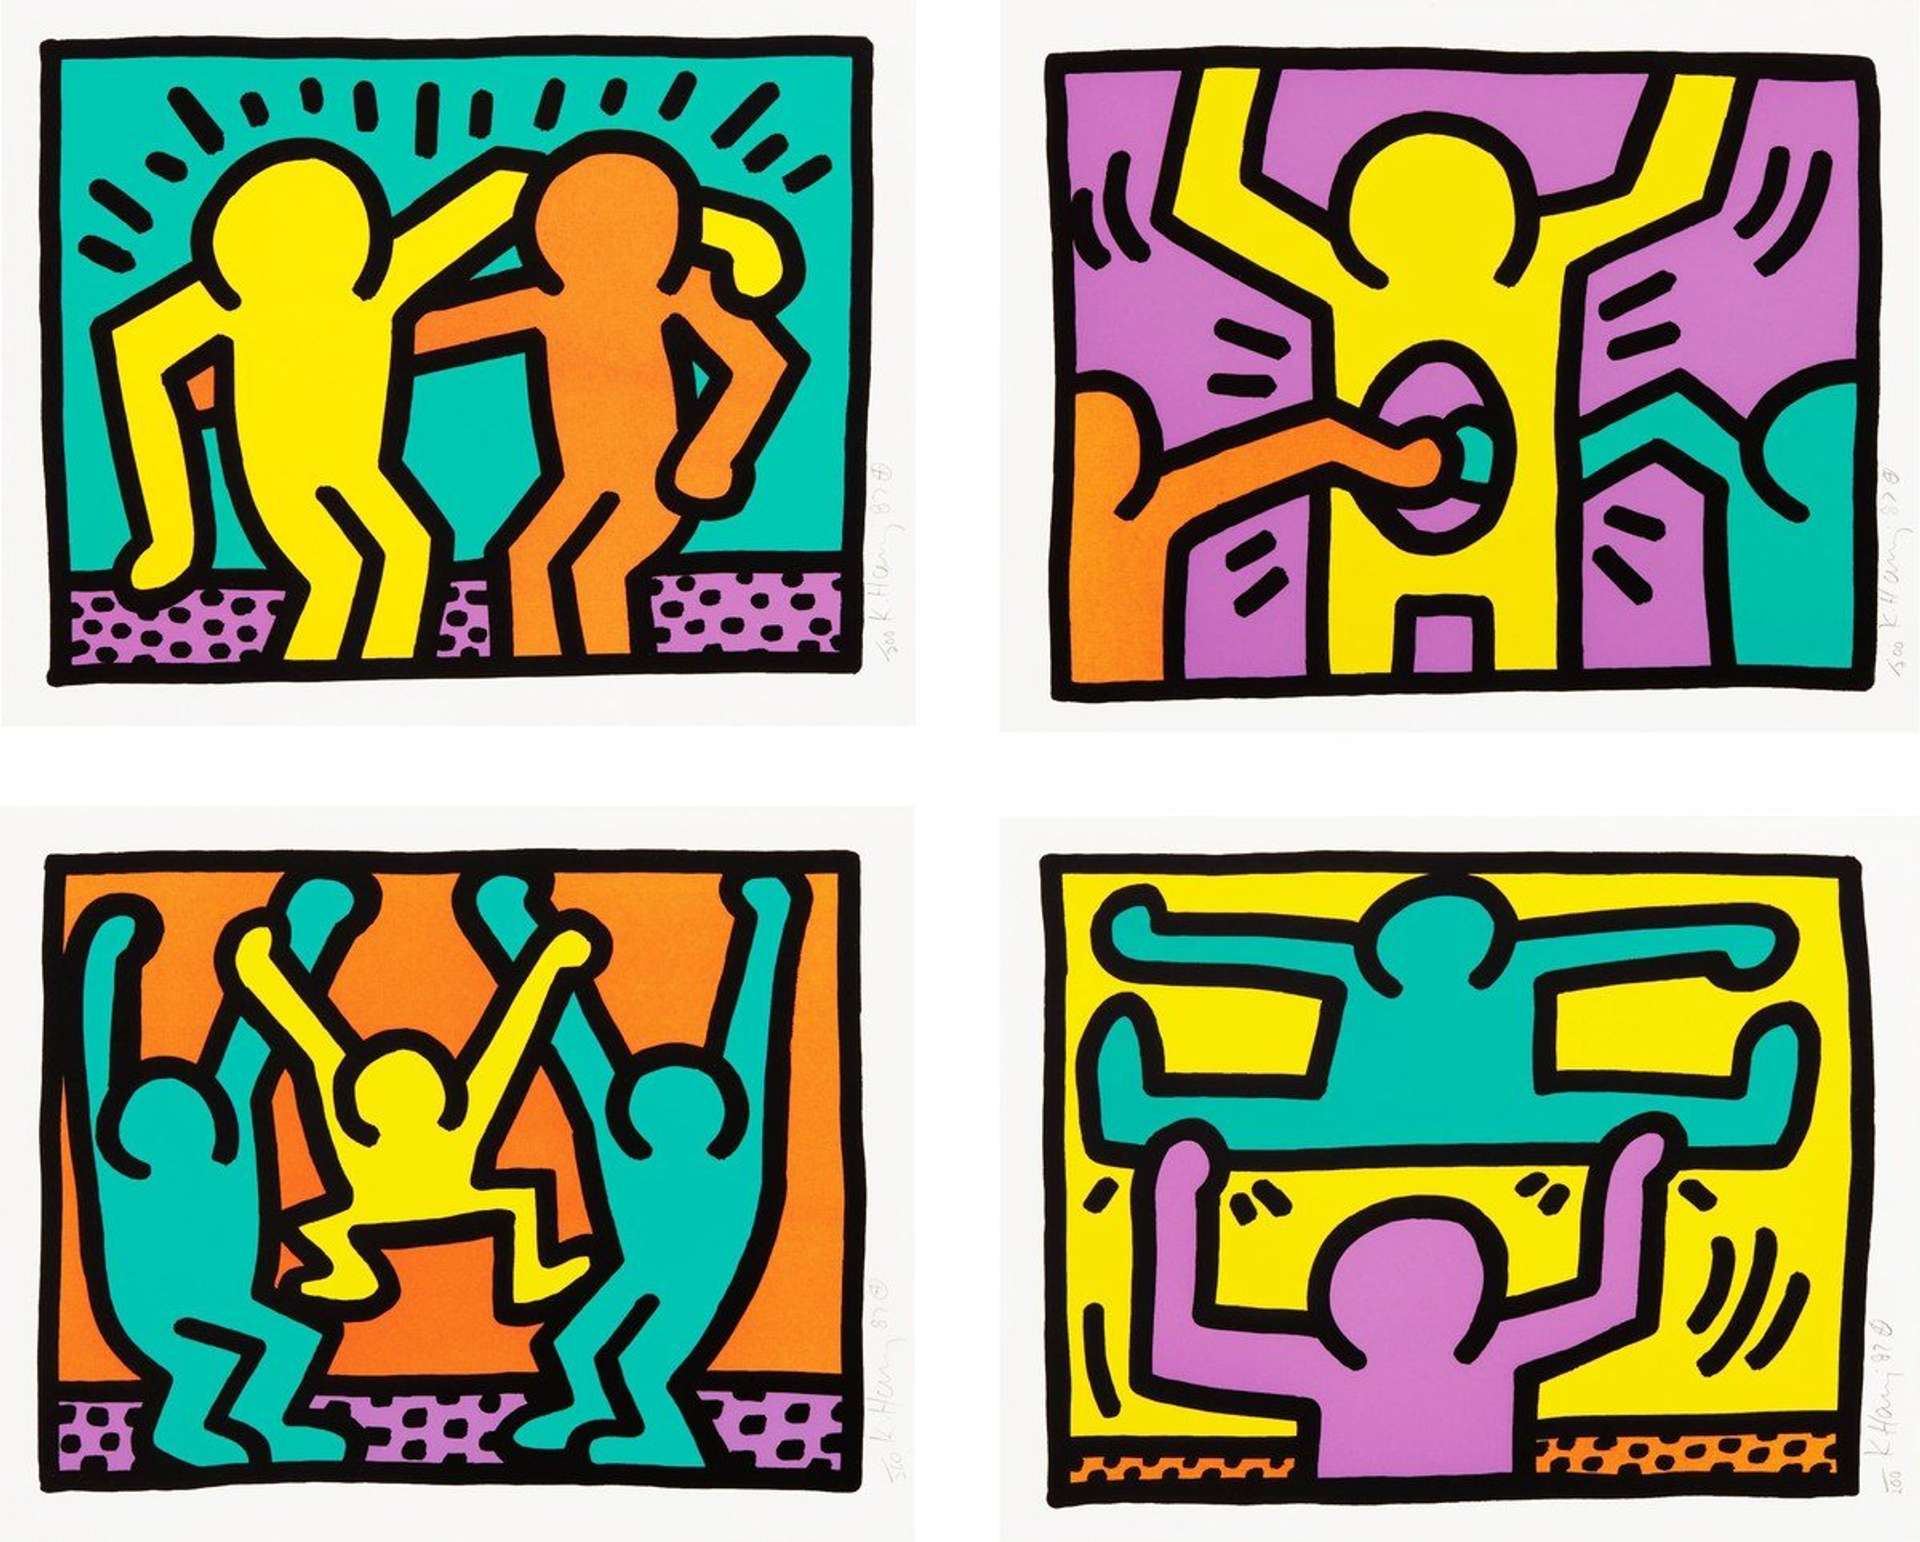 Keith Haring: The too-brief life and joyful work of the gay